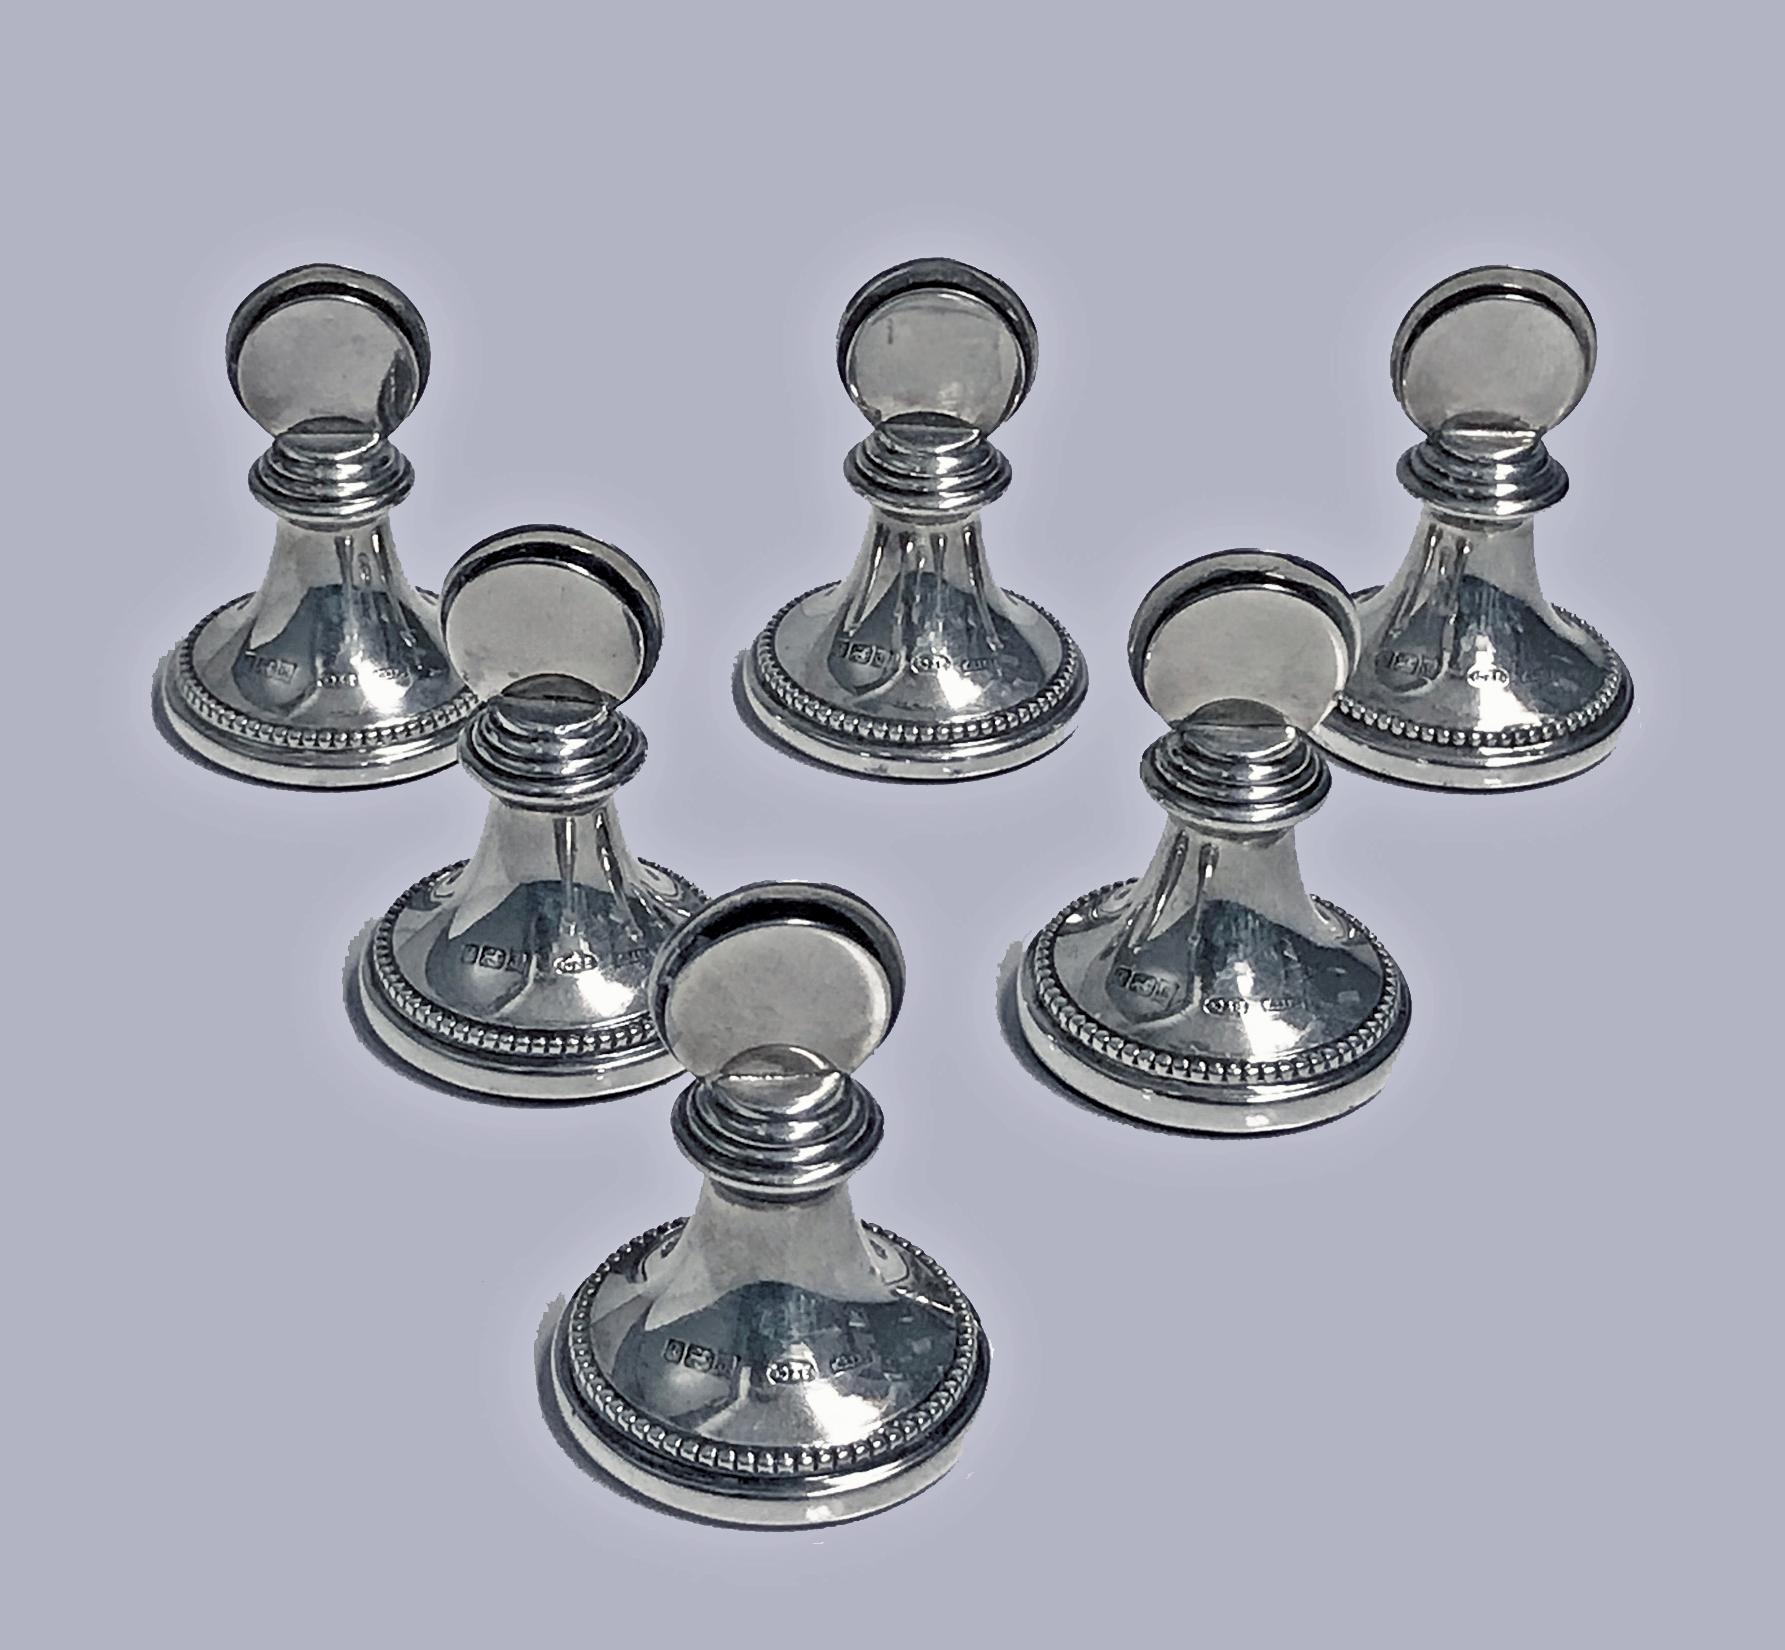 Set of 6 silver menu place card holders Birmingham 1989, Broadway & Co, fitted box. The holders in the form of chess pawns. Heights: 2.25 inches. Base diameters: 1.5 inches. Green baize under bases for protection.